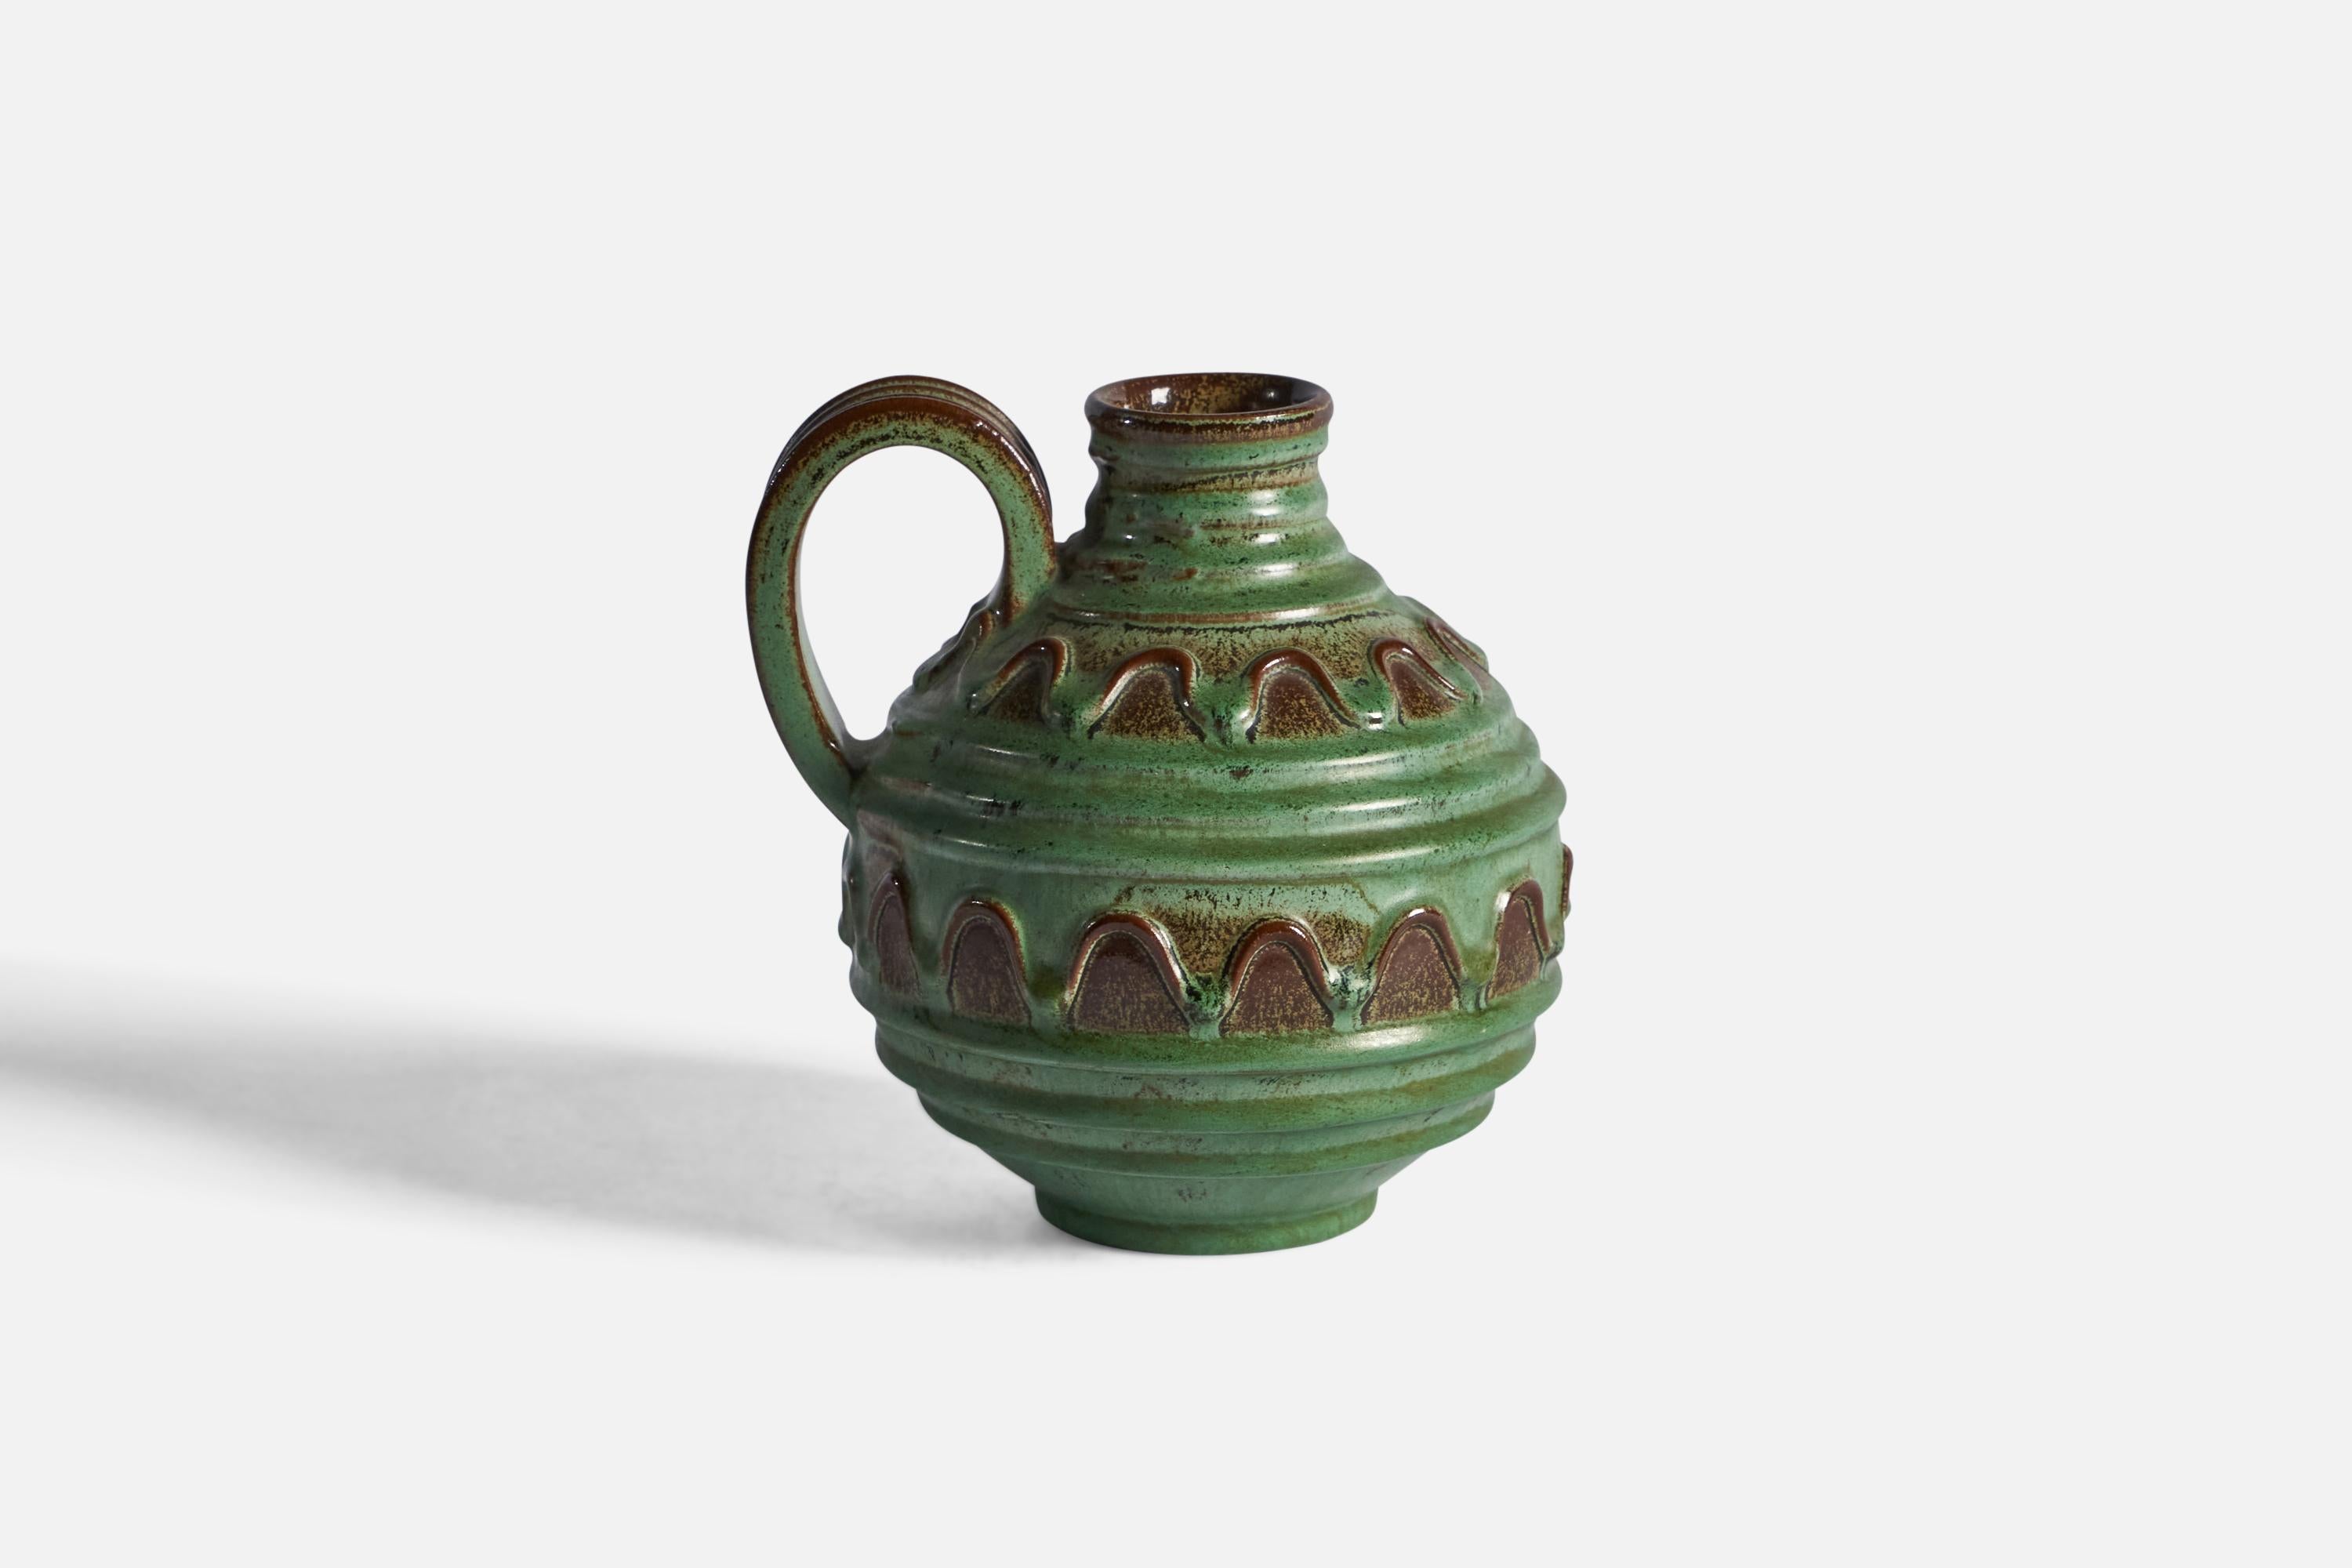 A green and brown-glazed pitcher or vase designed by Erik Mornils and produced by Nittsjö, Sweden, 1930s.